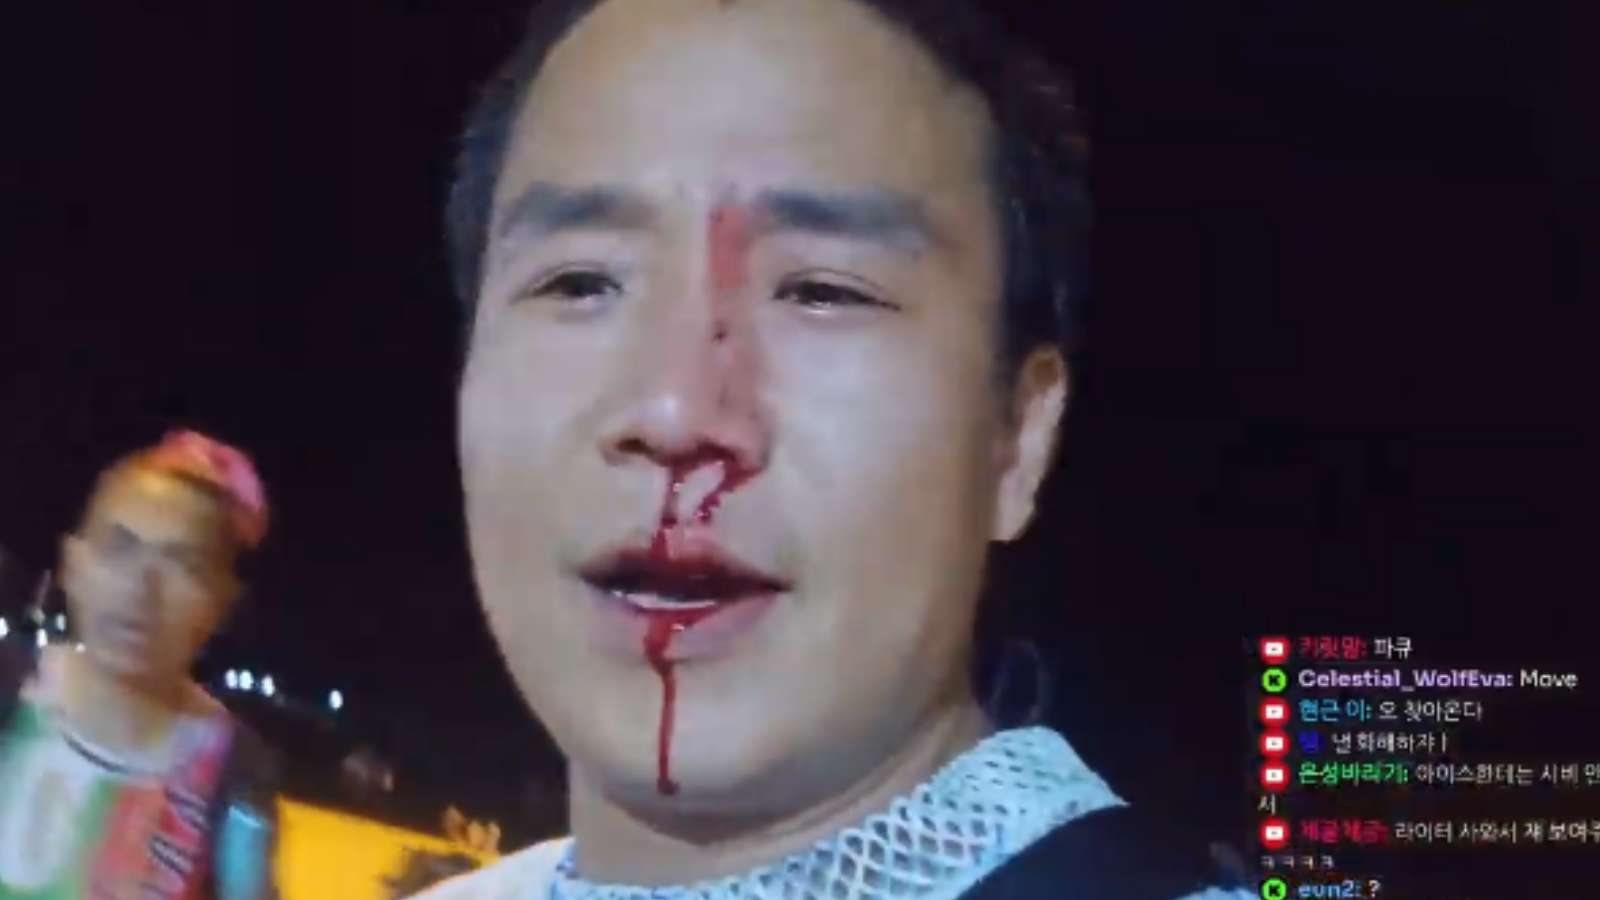 Kick streamer girit assaulted and bloodied during irl stream